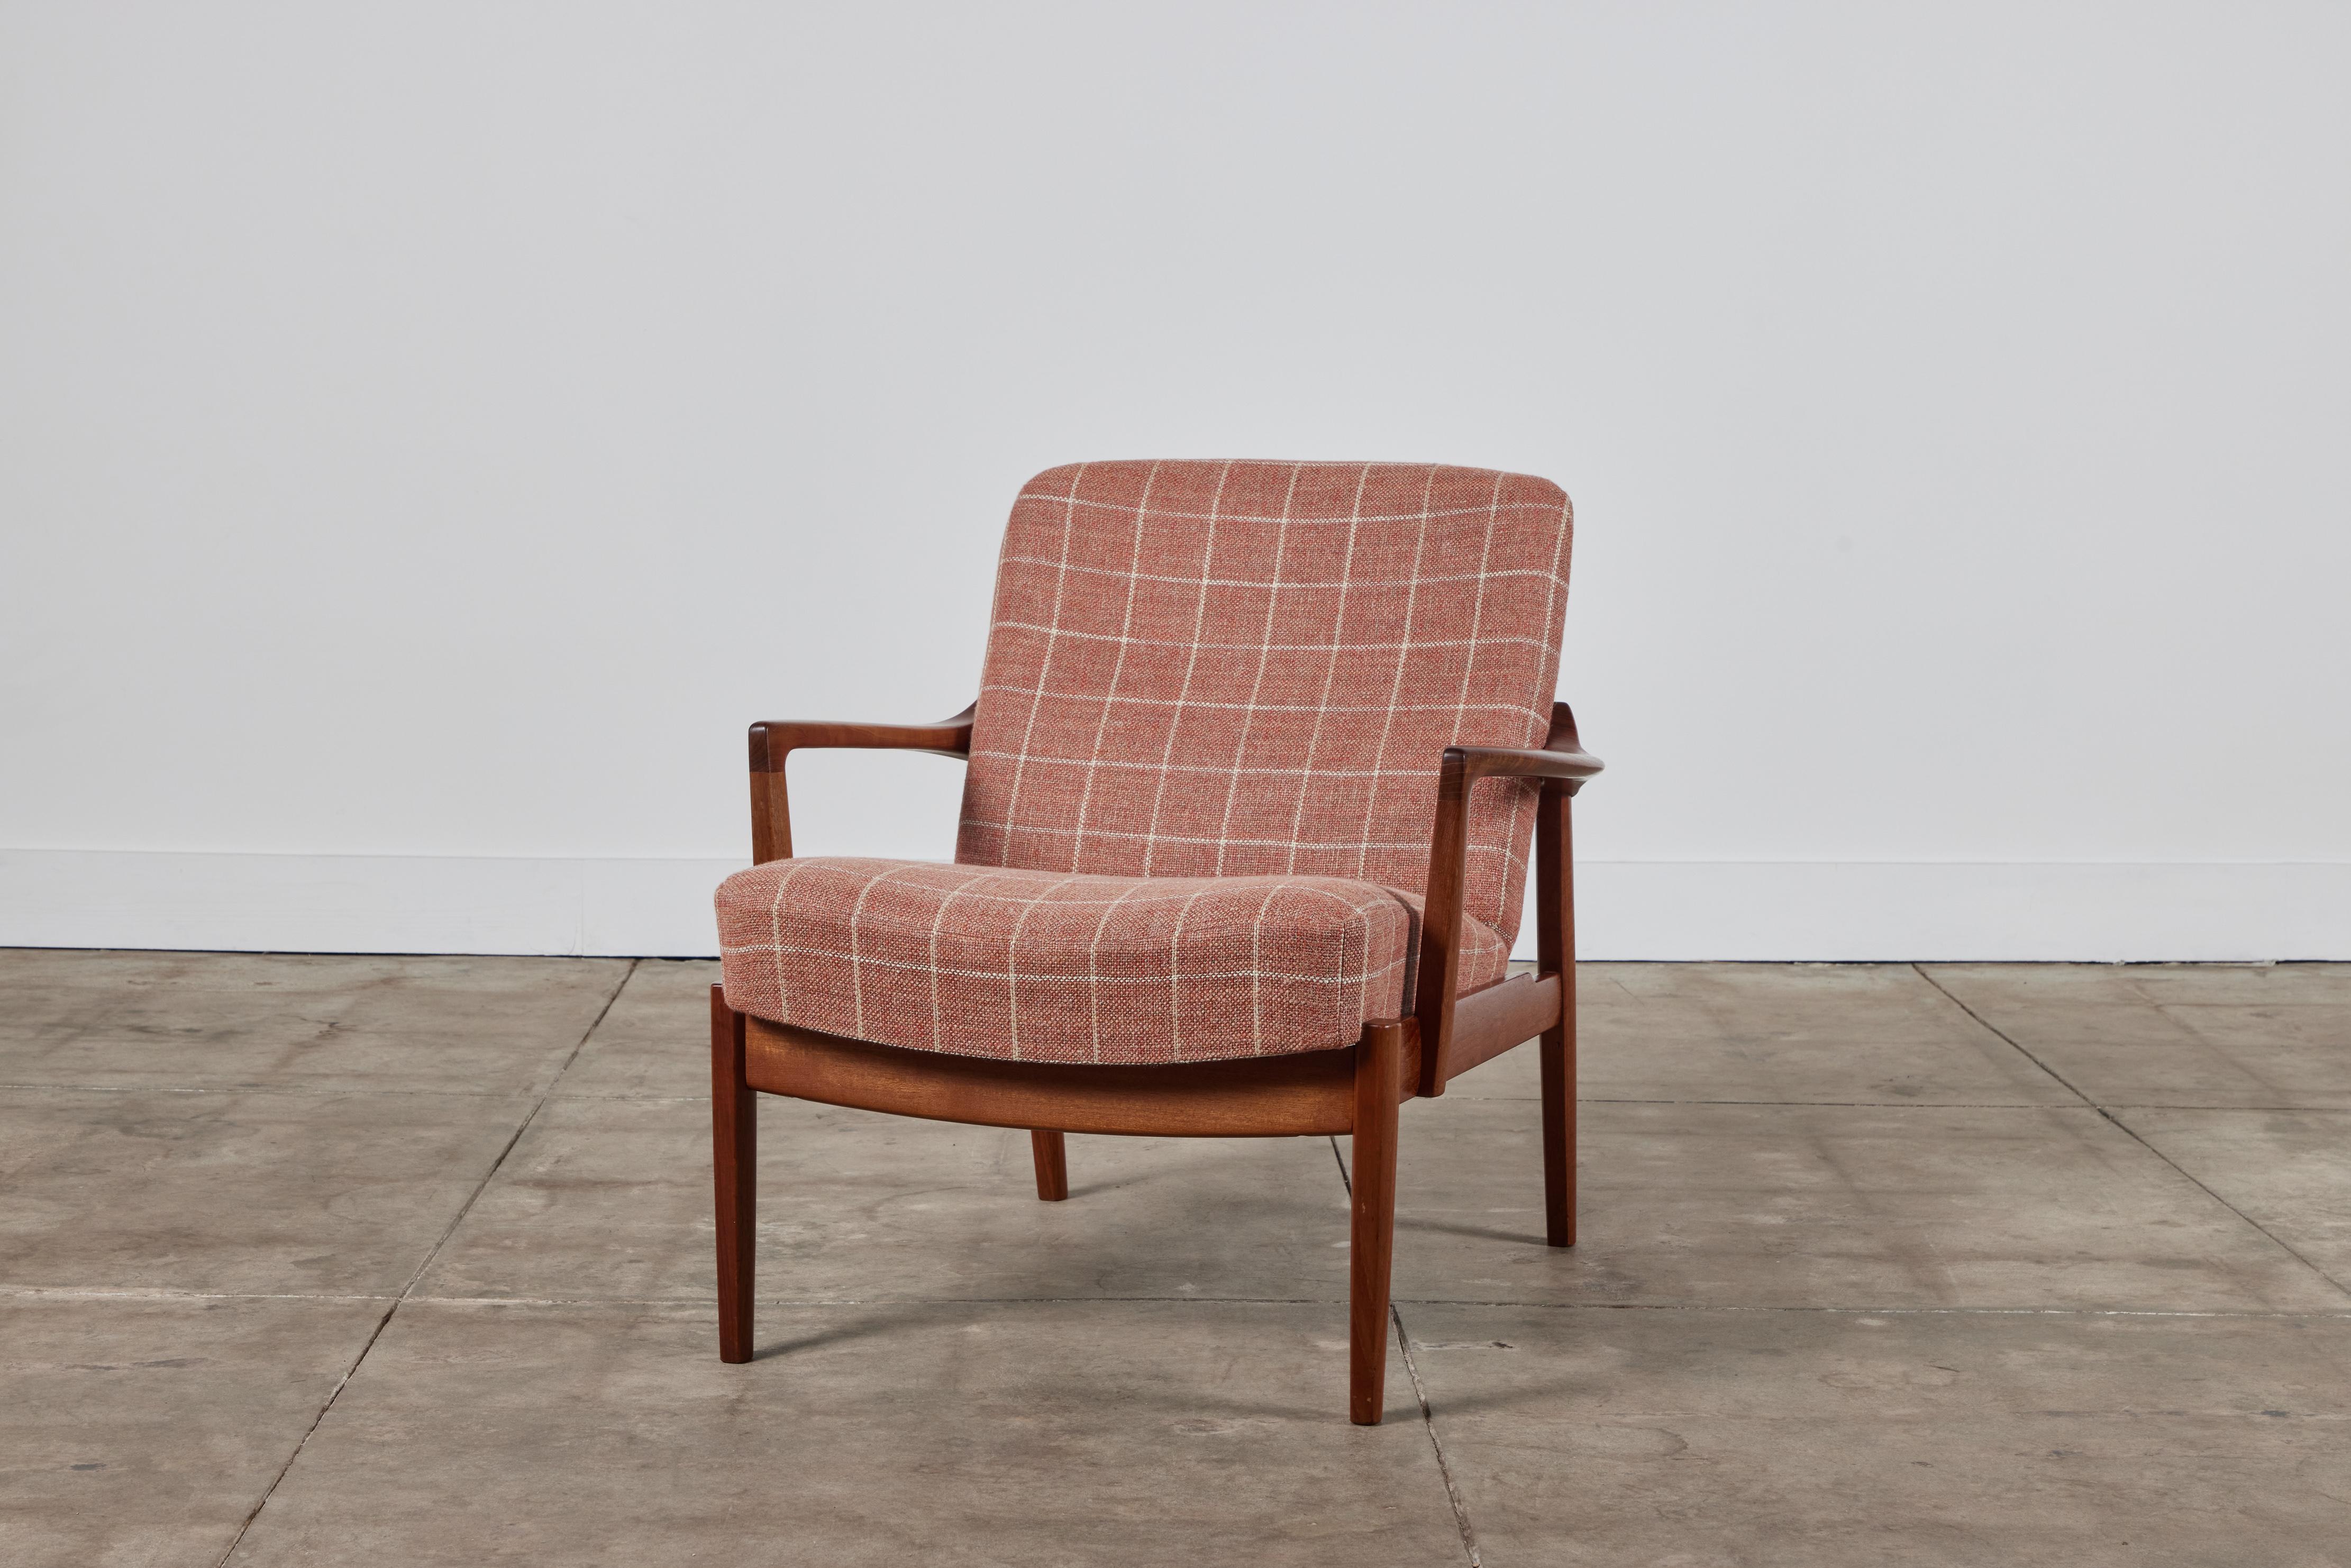 A low, Danish lounge chair by husband-and-wife design team Tove and Edvard Kindt-Larsen for France & Son. This example from 1958 has a teak frame around fixed cushions, upholstered in a window pane wool blend fabric. The design is distinguished by